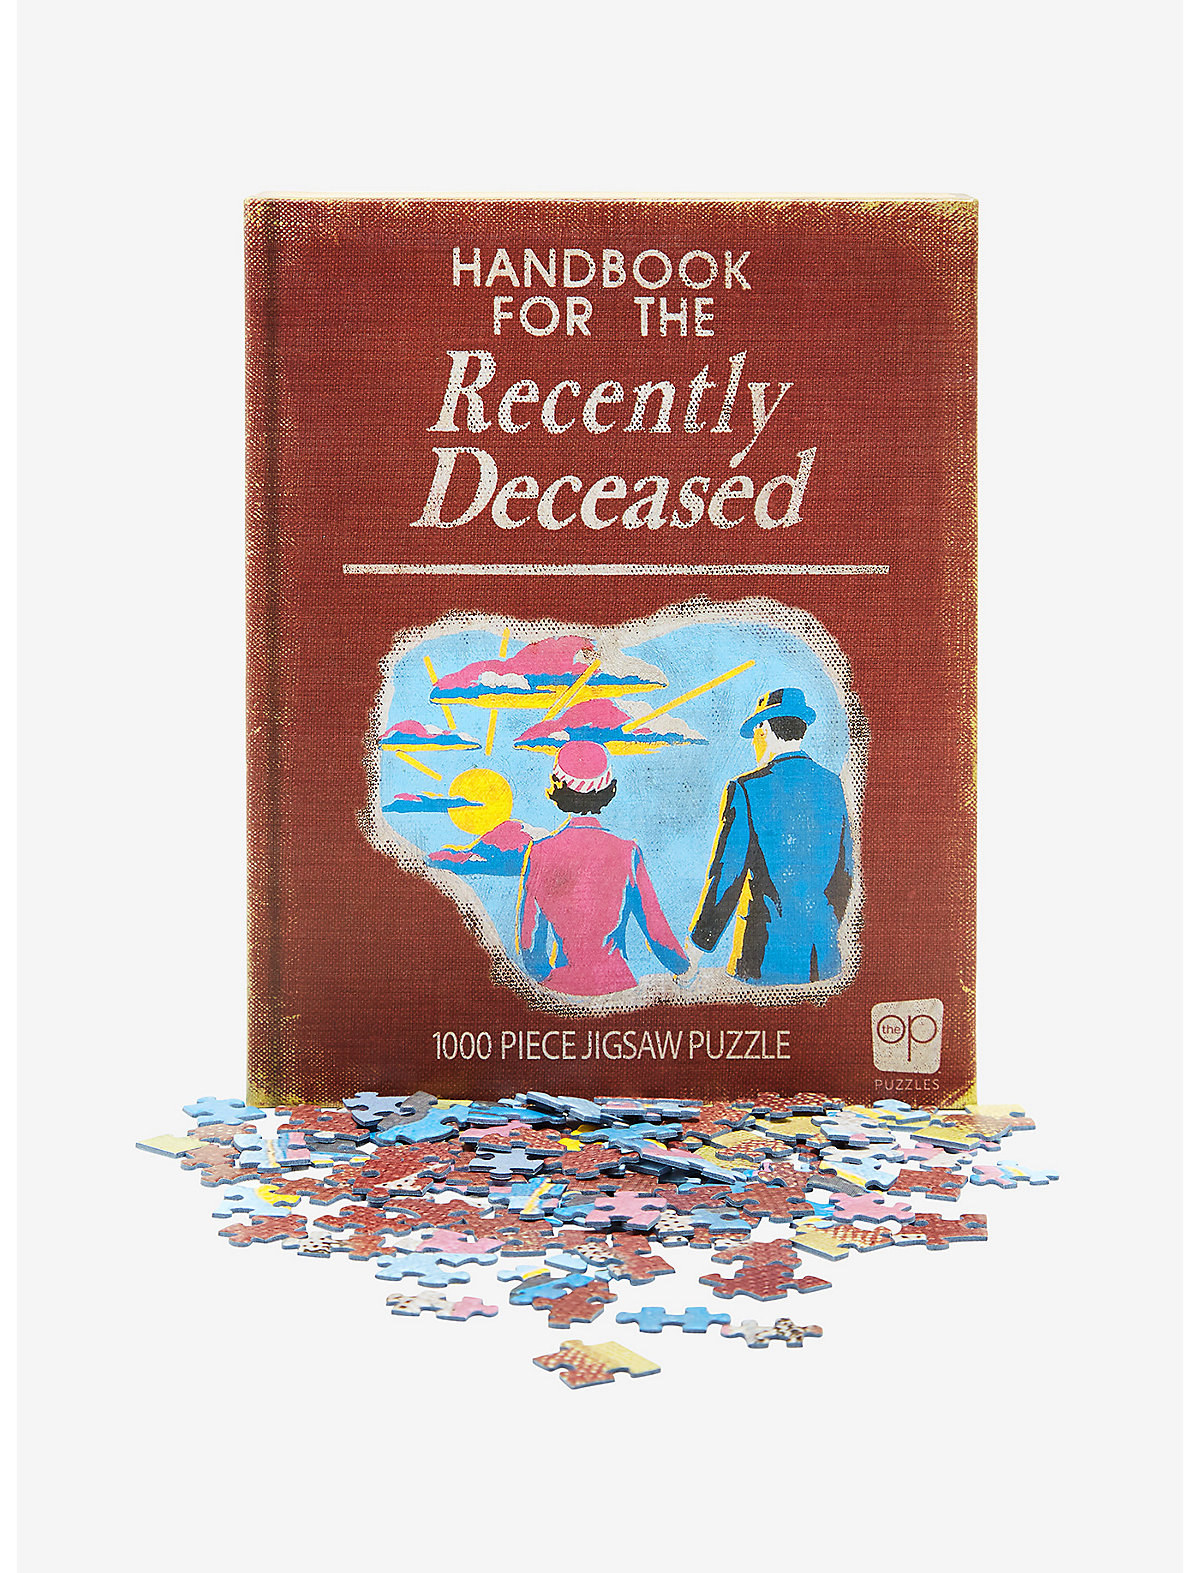 the puzzle that looks like the handbook for the recently deceased